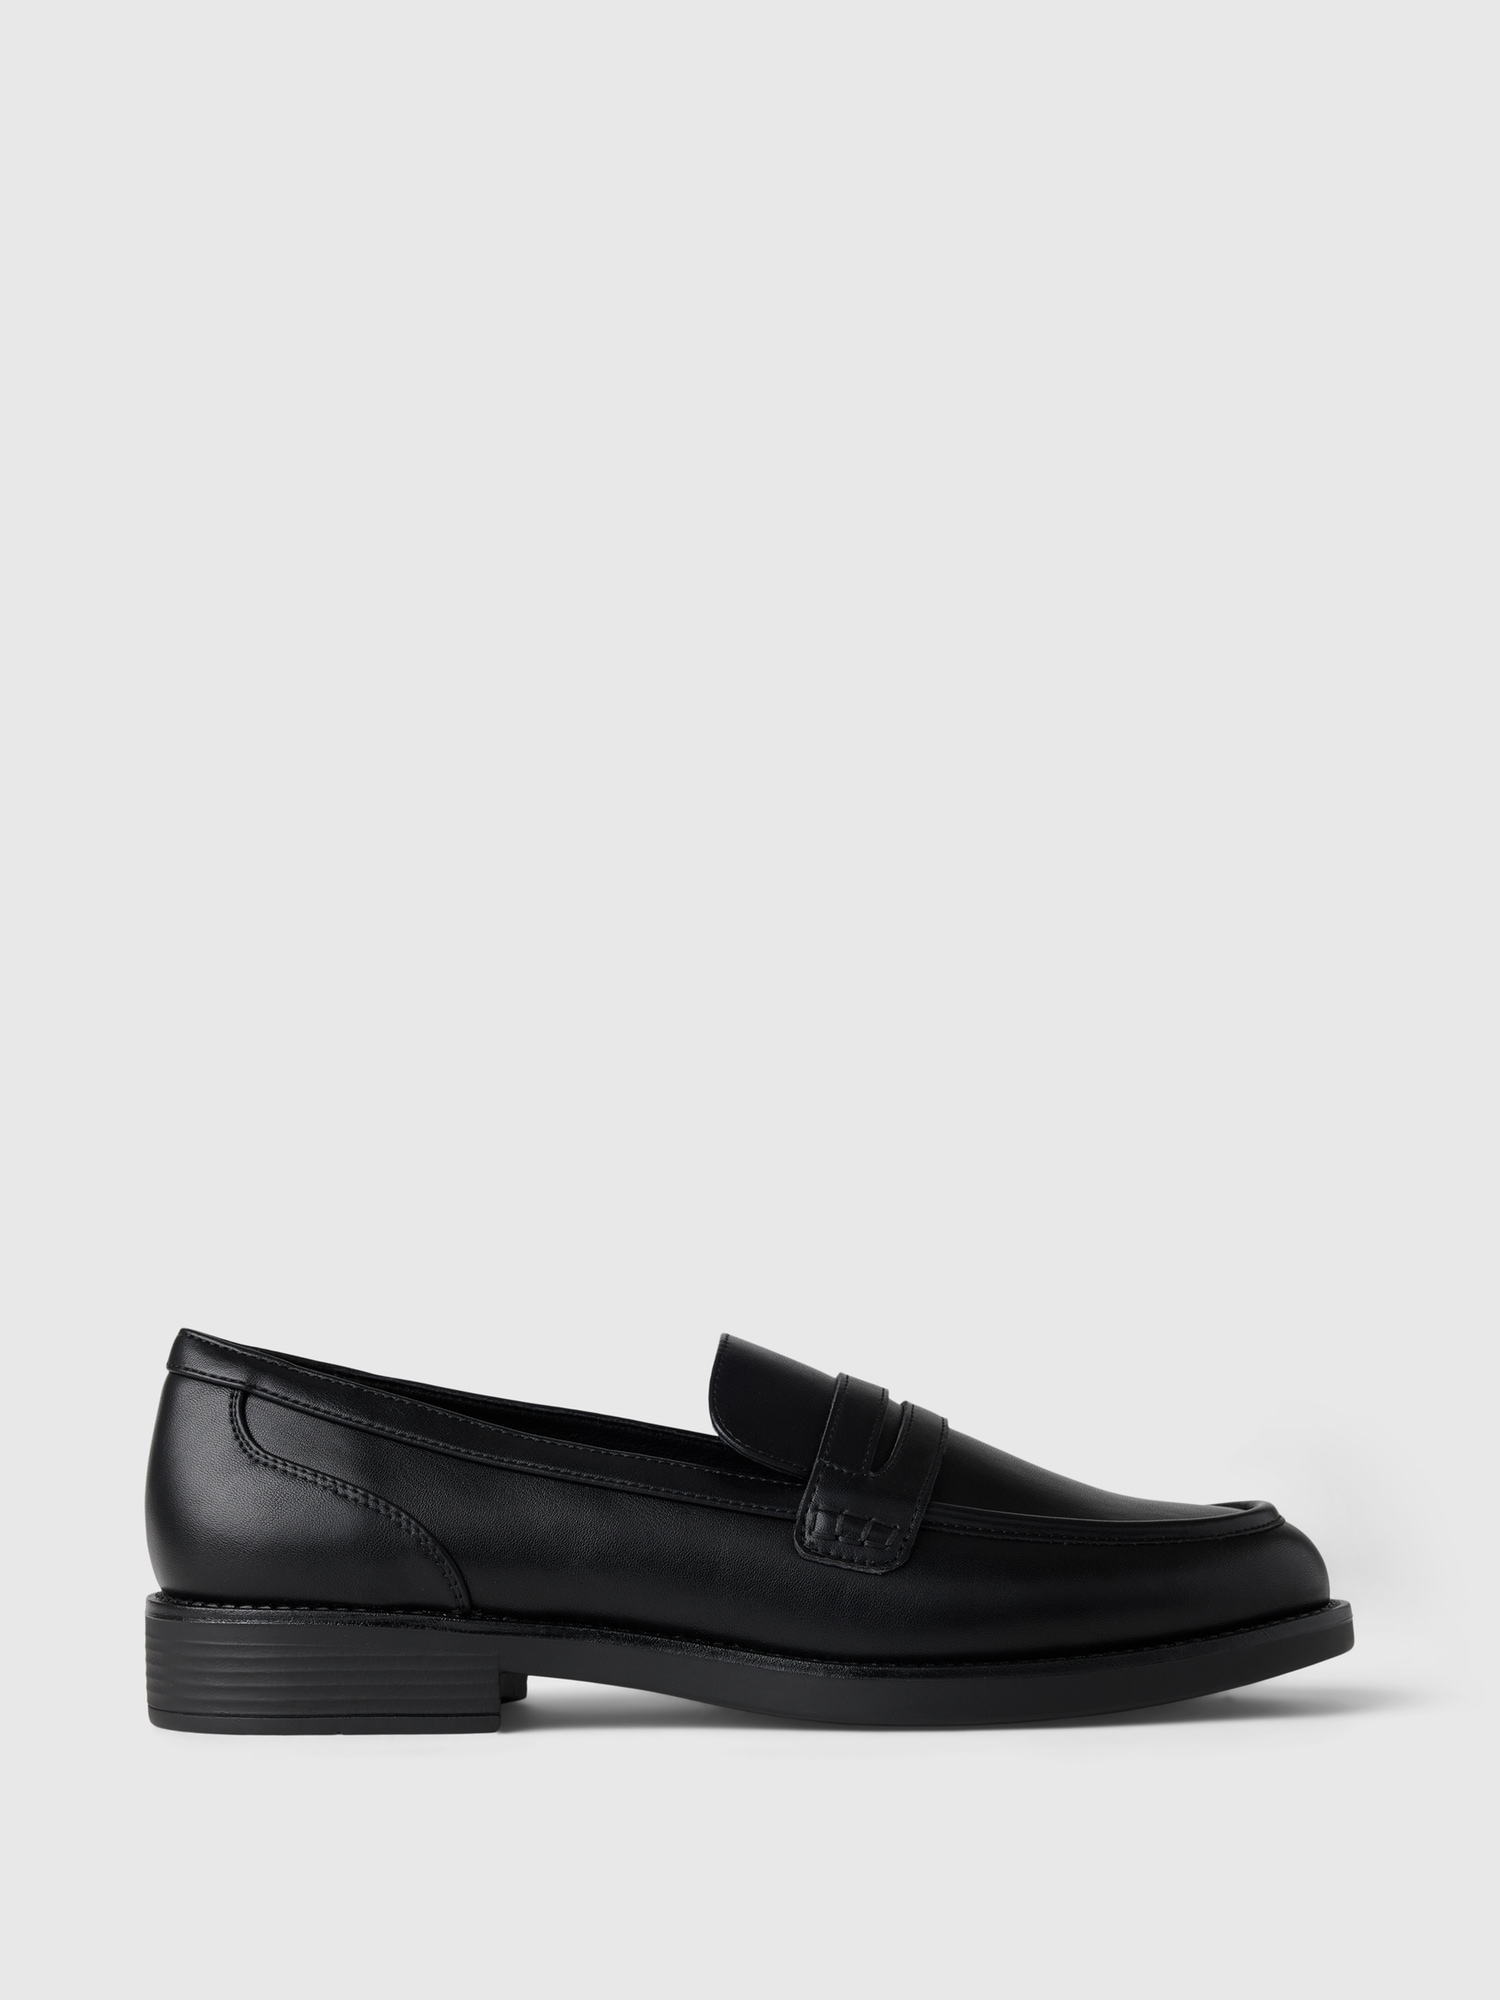 Vegan Leather Loafers